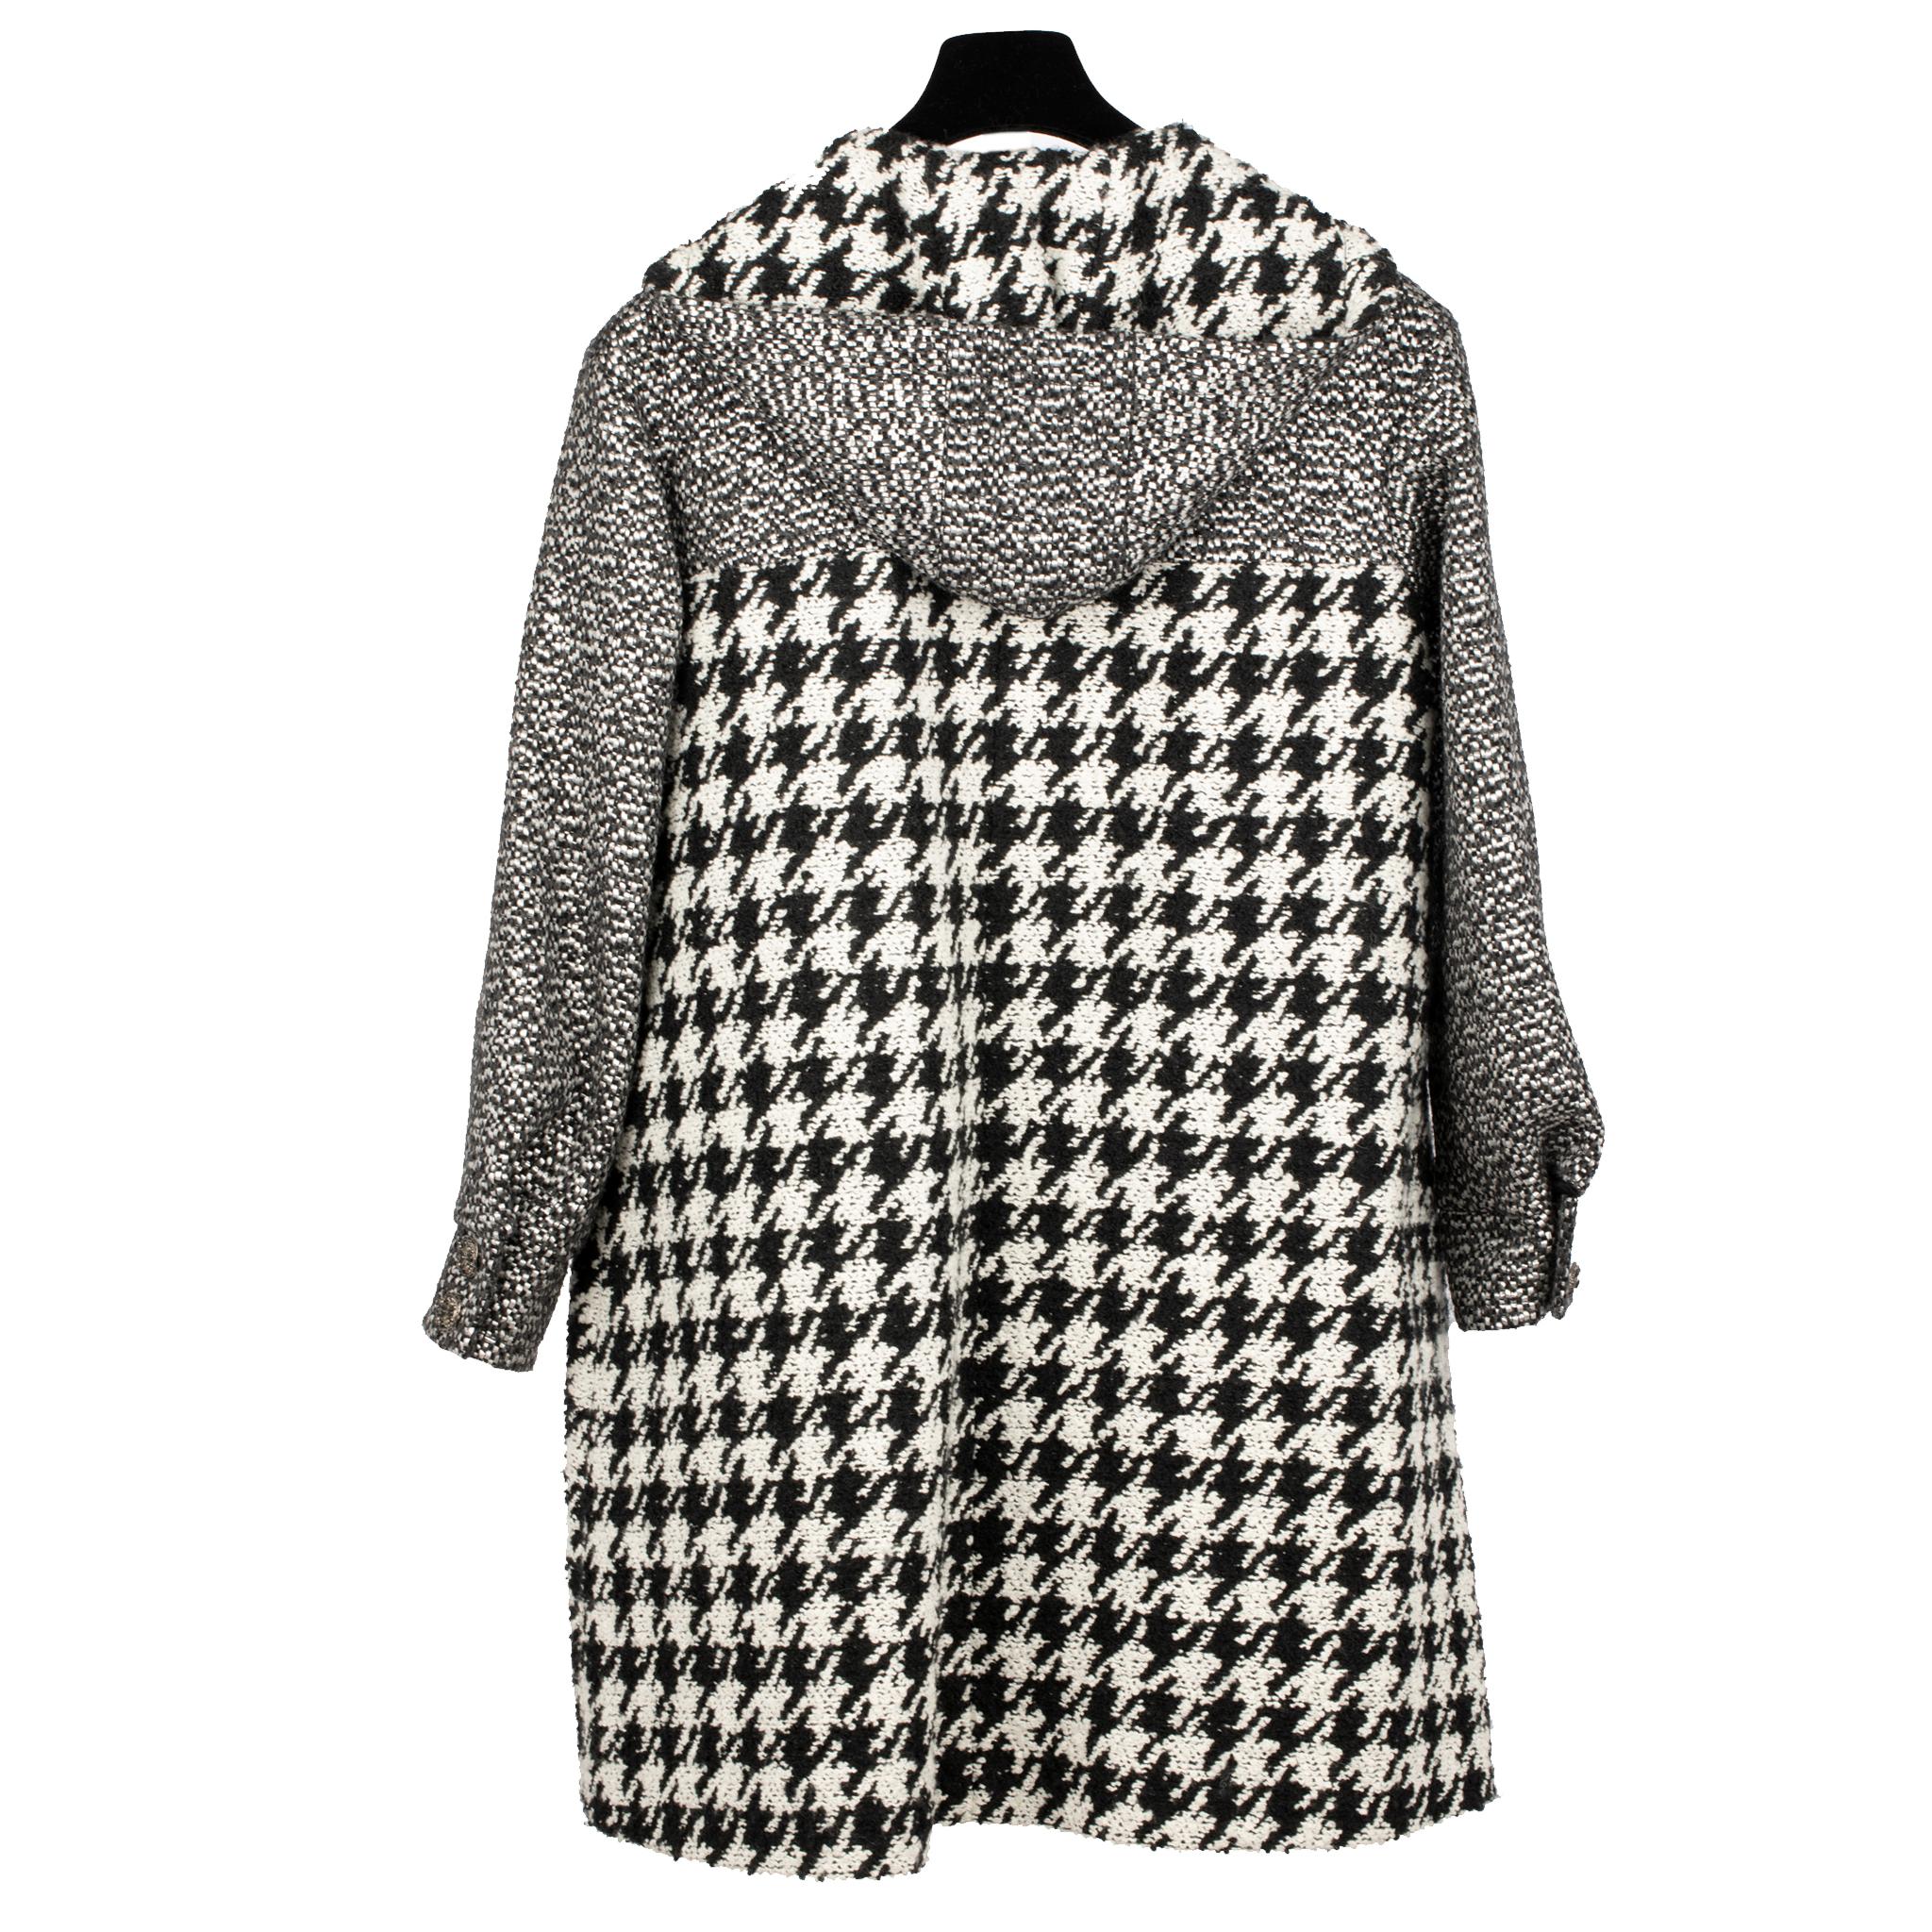 Chanel Black & White Oversized Houndstooth Coat With Hood 38 FR 4